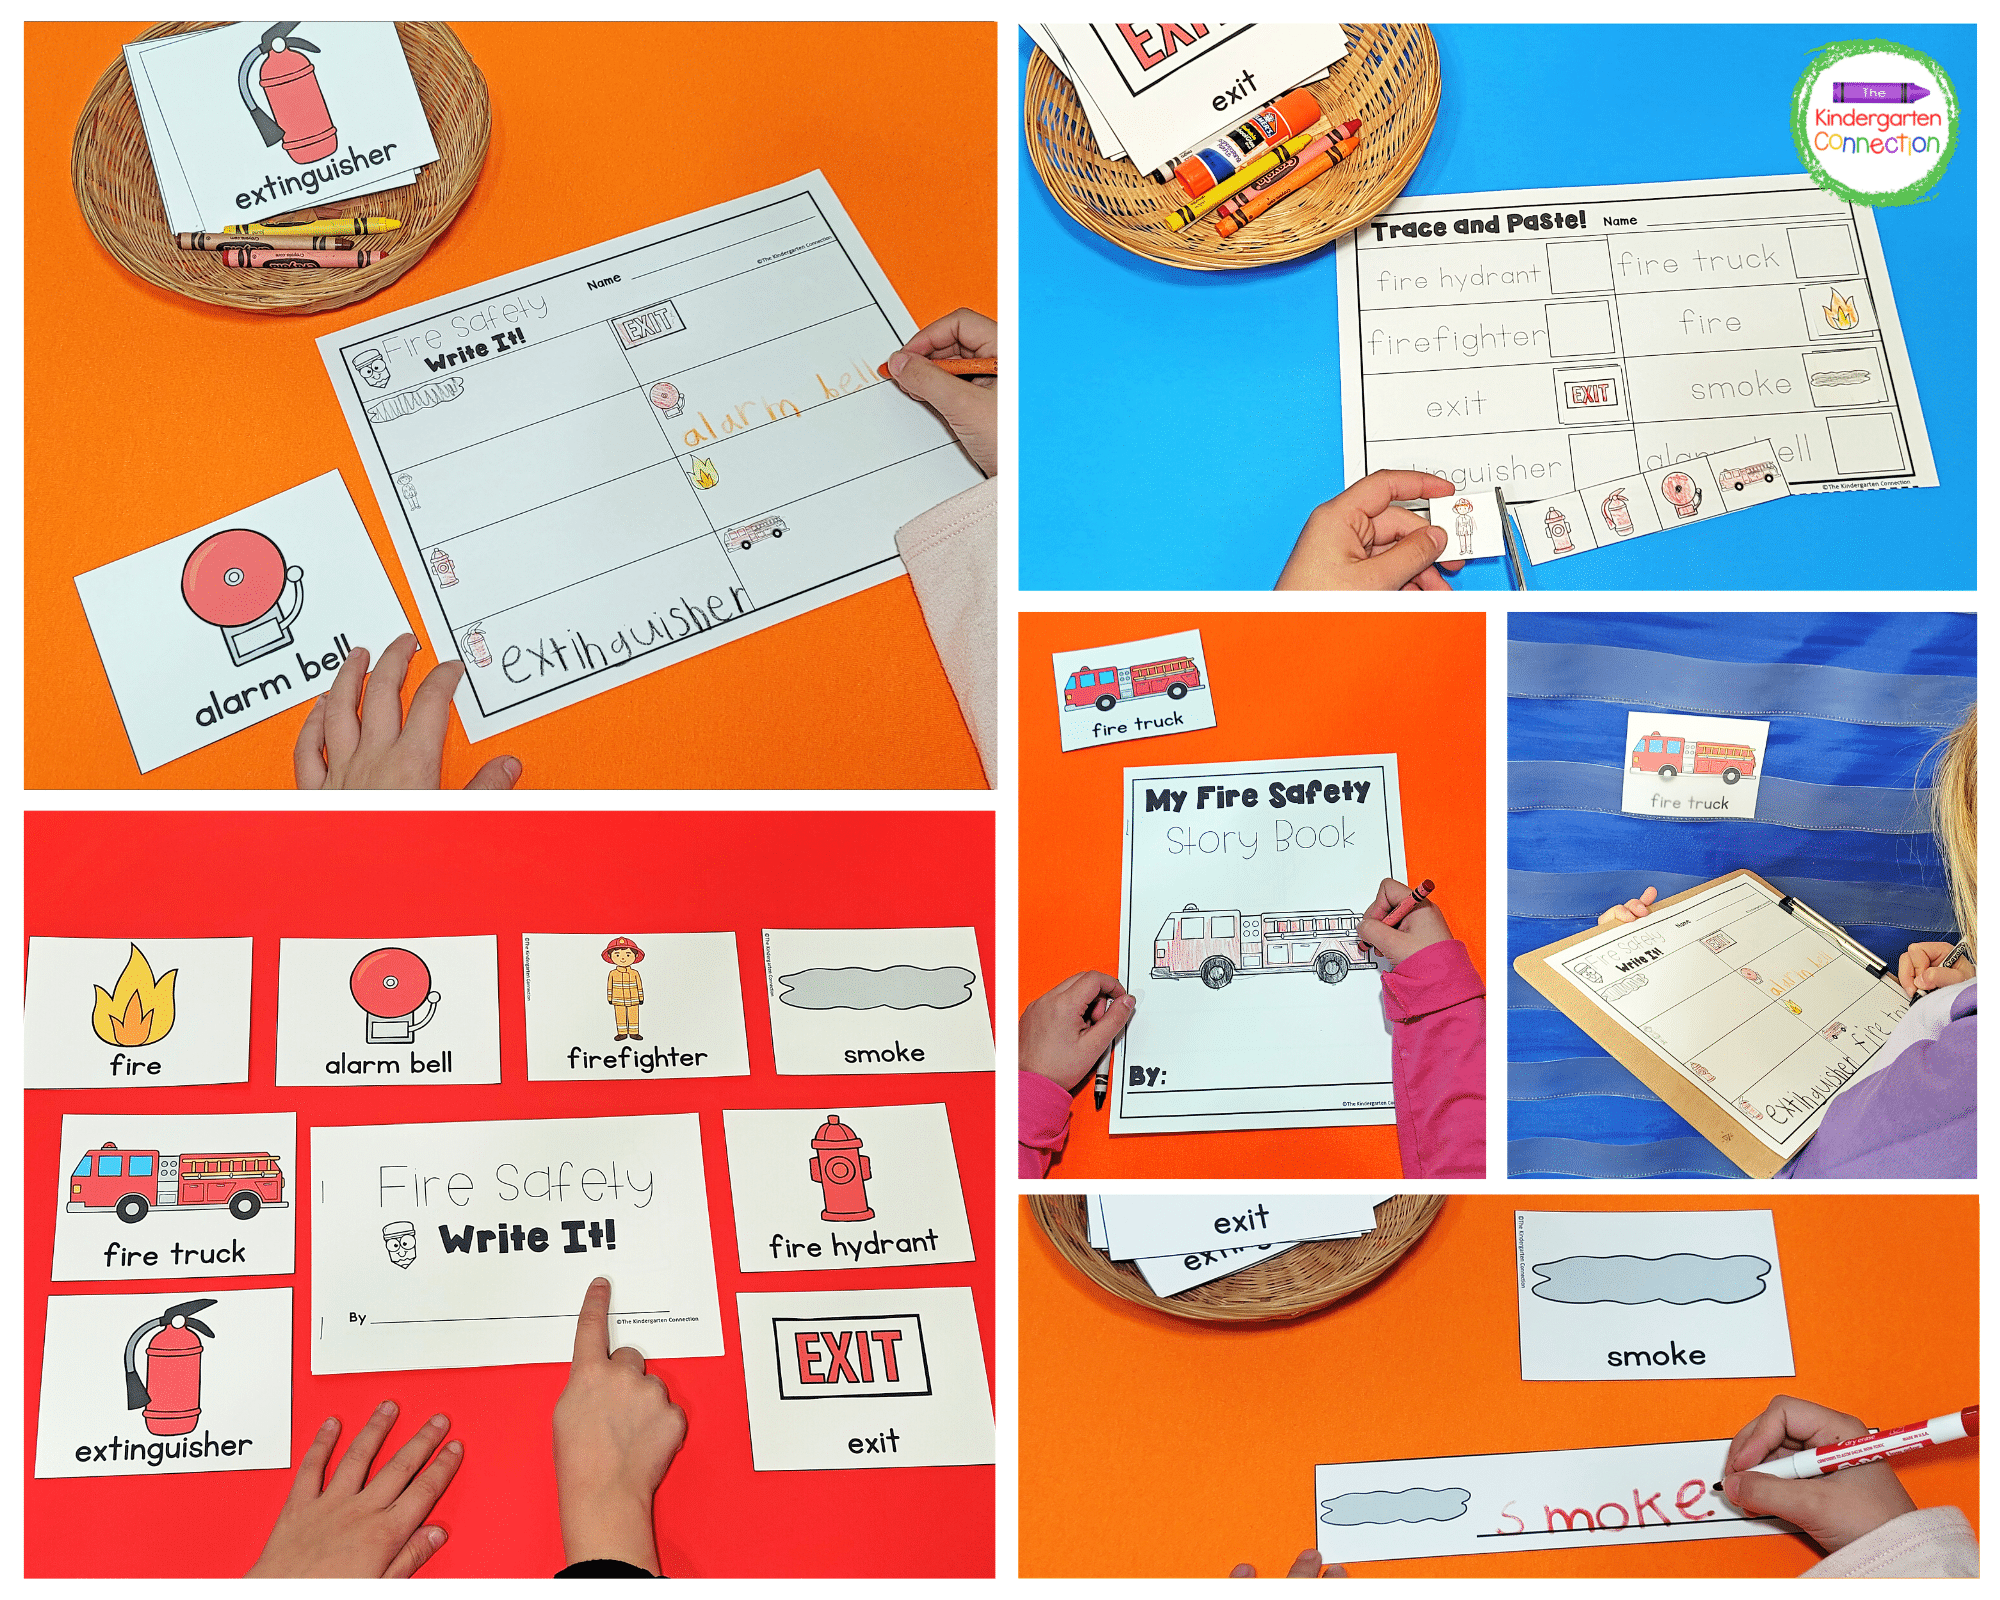 These fire safety writing activities are hands-on, fun, and engaging!